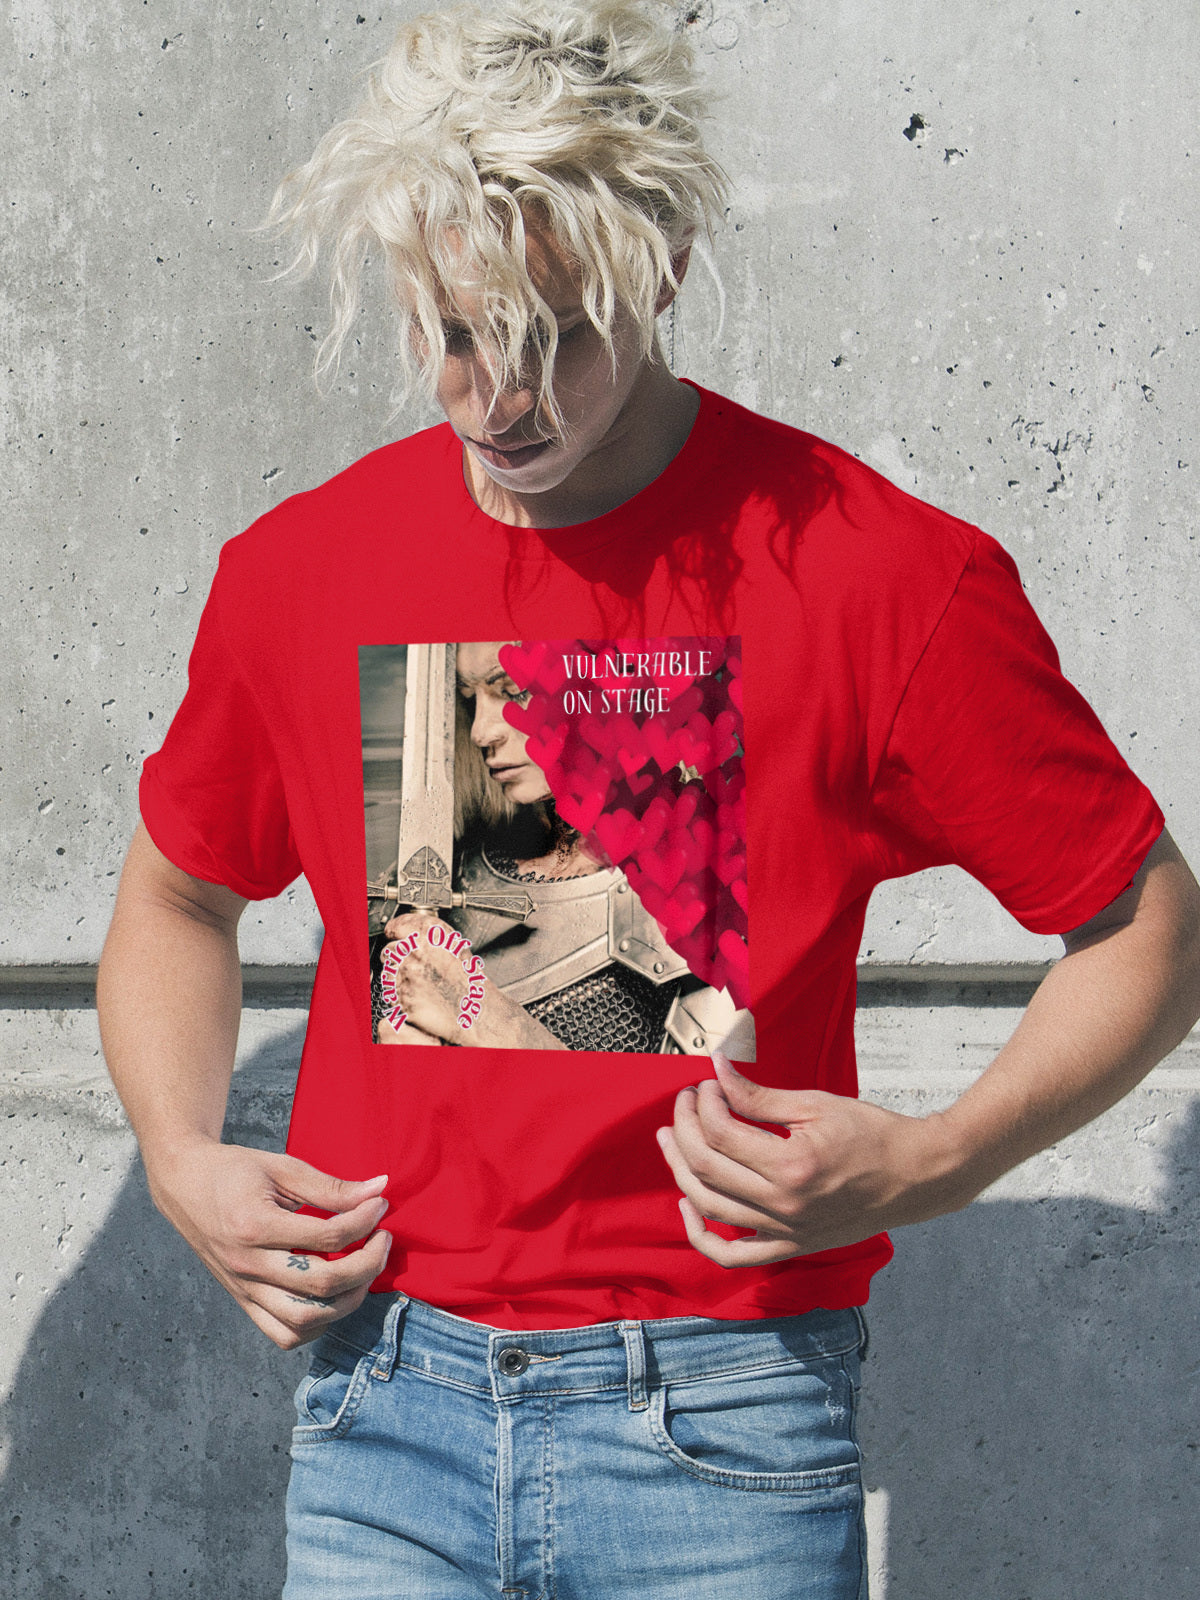 A bold and stylish Unisex Artist Vulnerable Warrior T-Shirt in Classic design, specifically crafted for Female Artists The shirt features empowering graphics, celebrating authenticity on stage and fierce warrior strength off stage. Perfect for making a statement in the world of art and beyond. Red T-Shirt